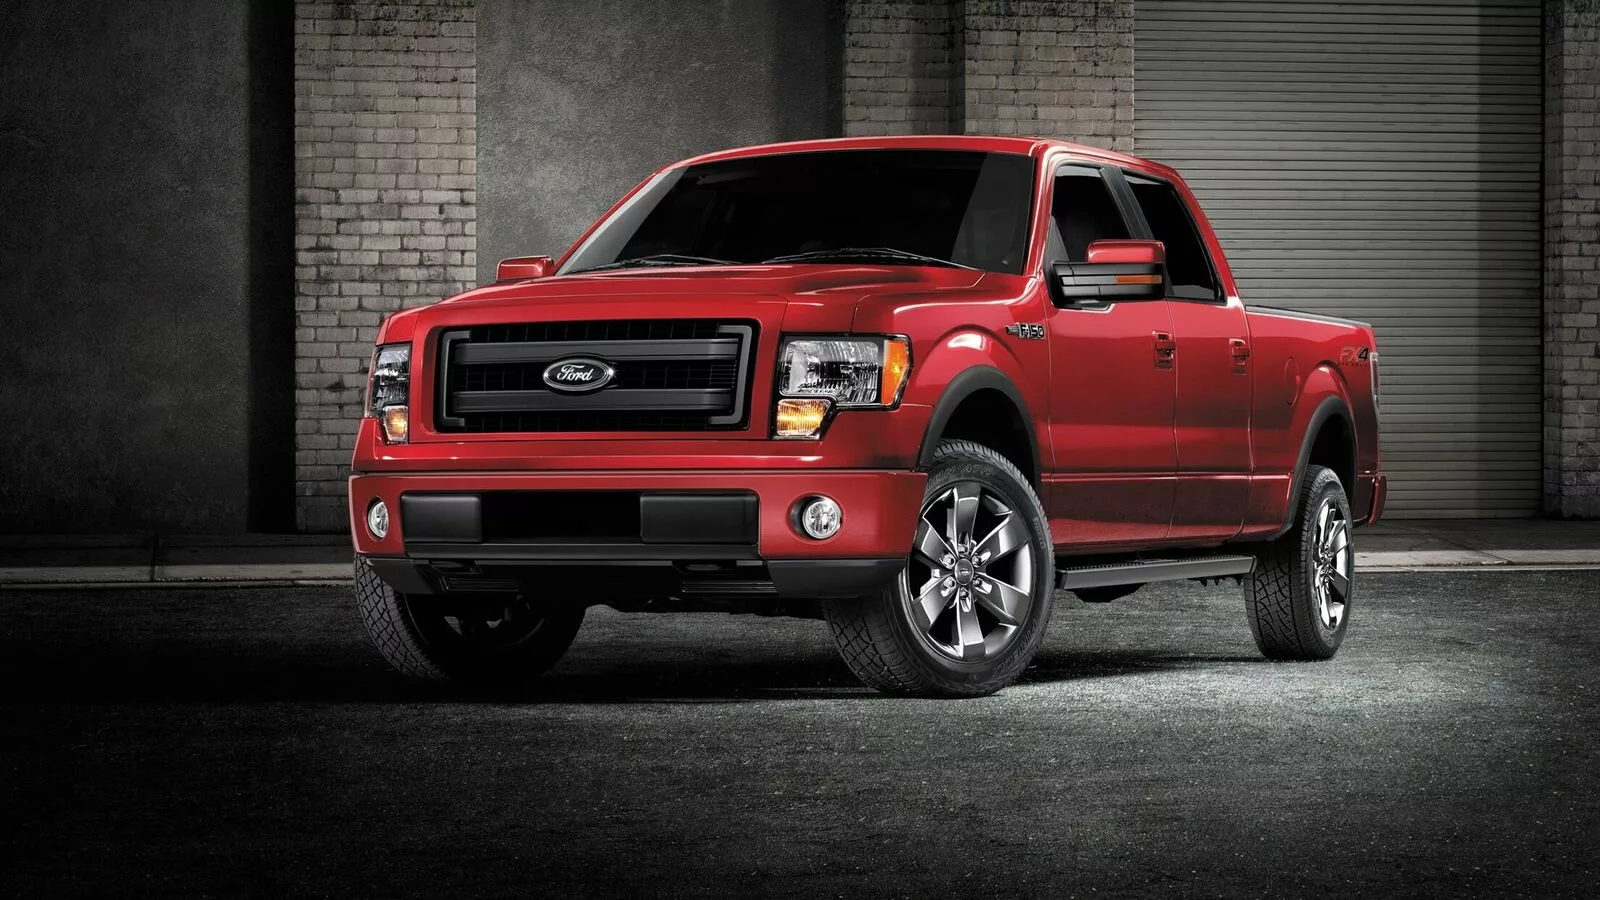 Ford pickups can downshift without warning, increase crash risk, reveals probe